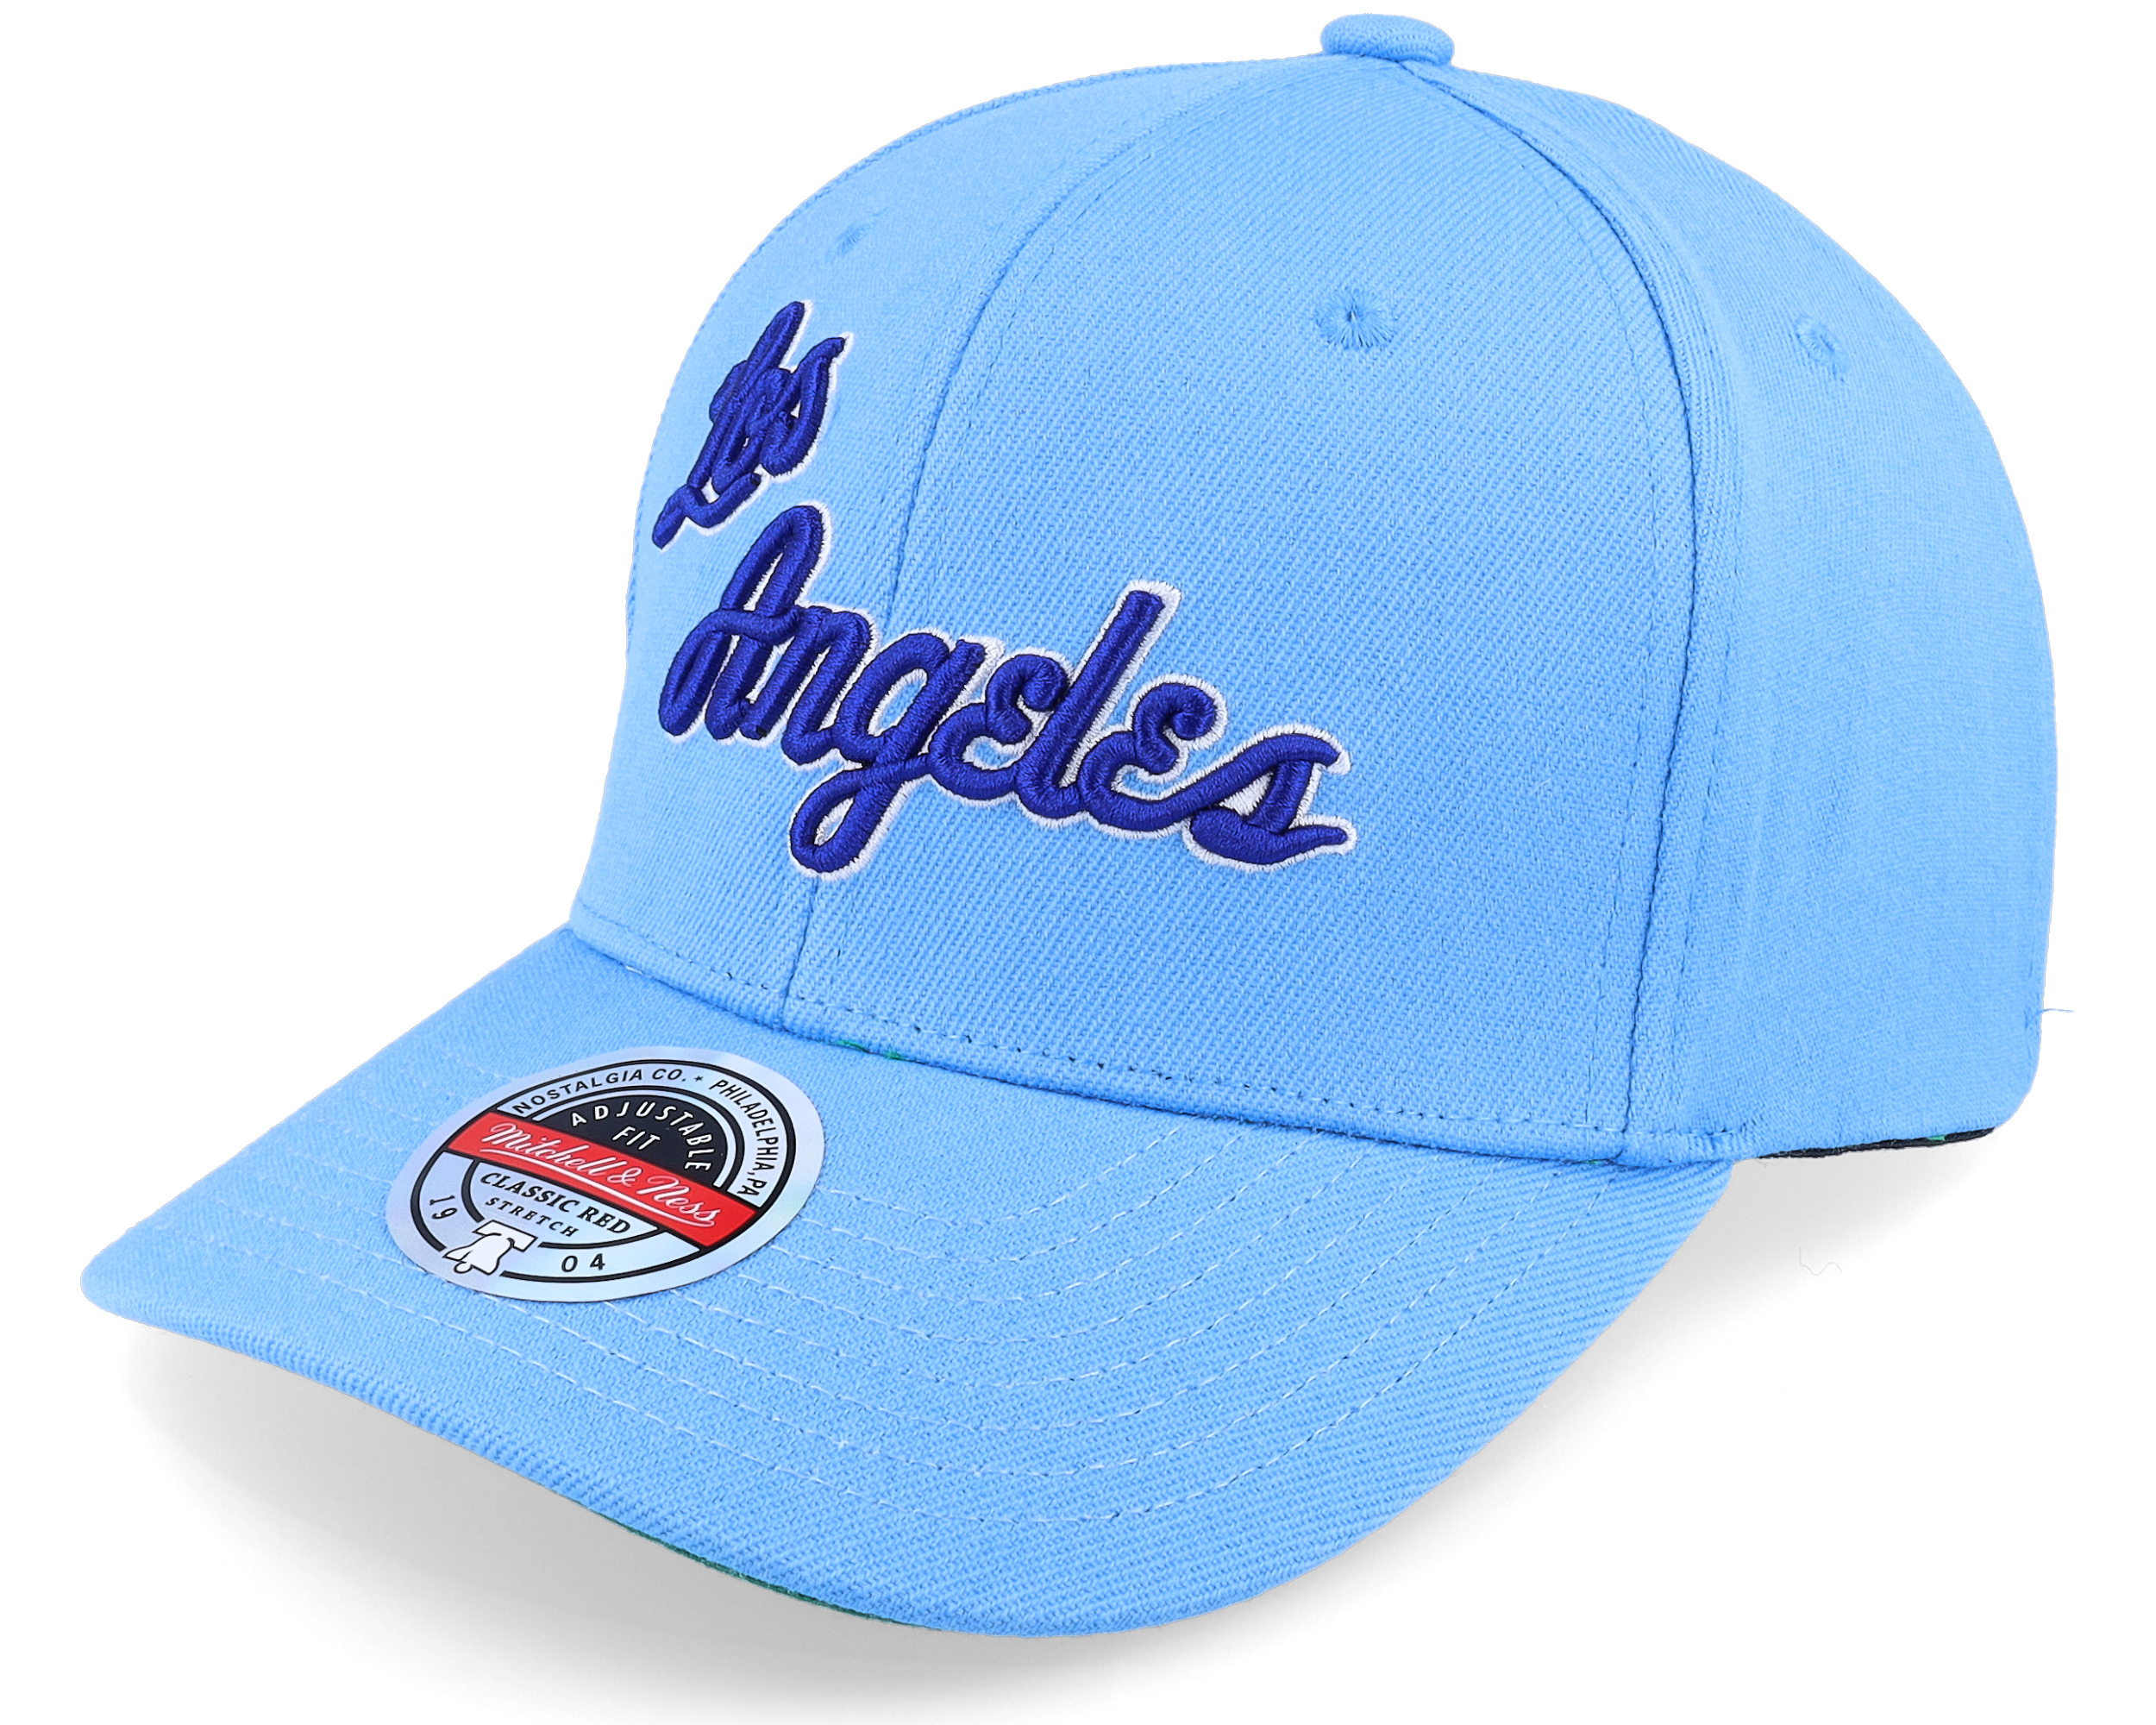 Los Angeles Dodgers / Lakers Flexfit Classic Fitted Hat 